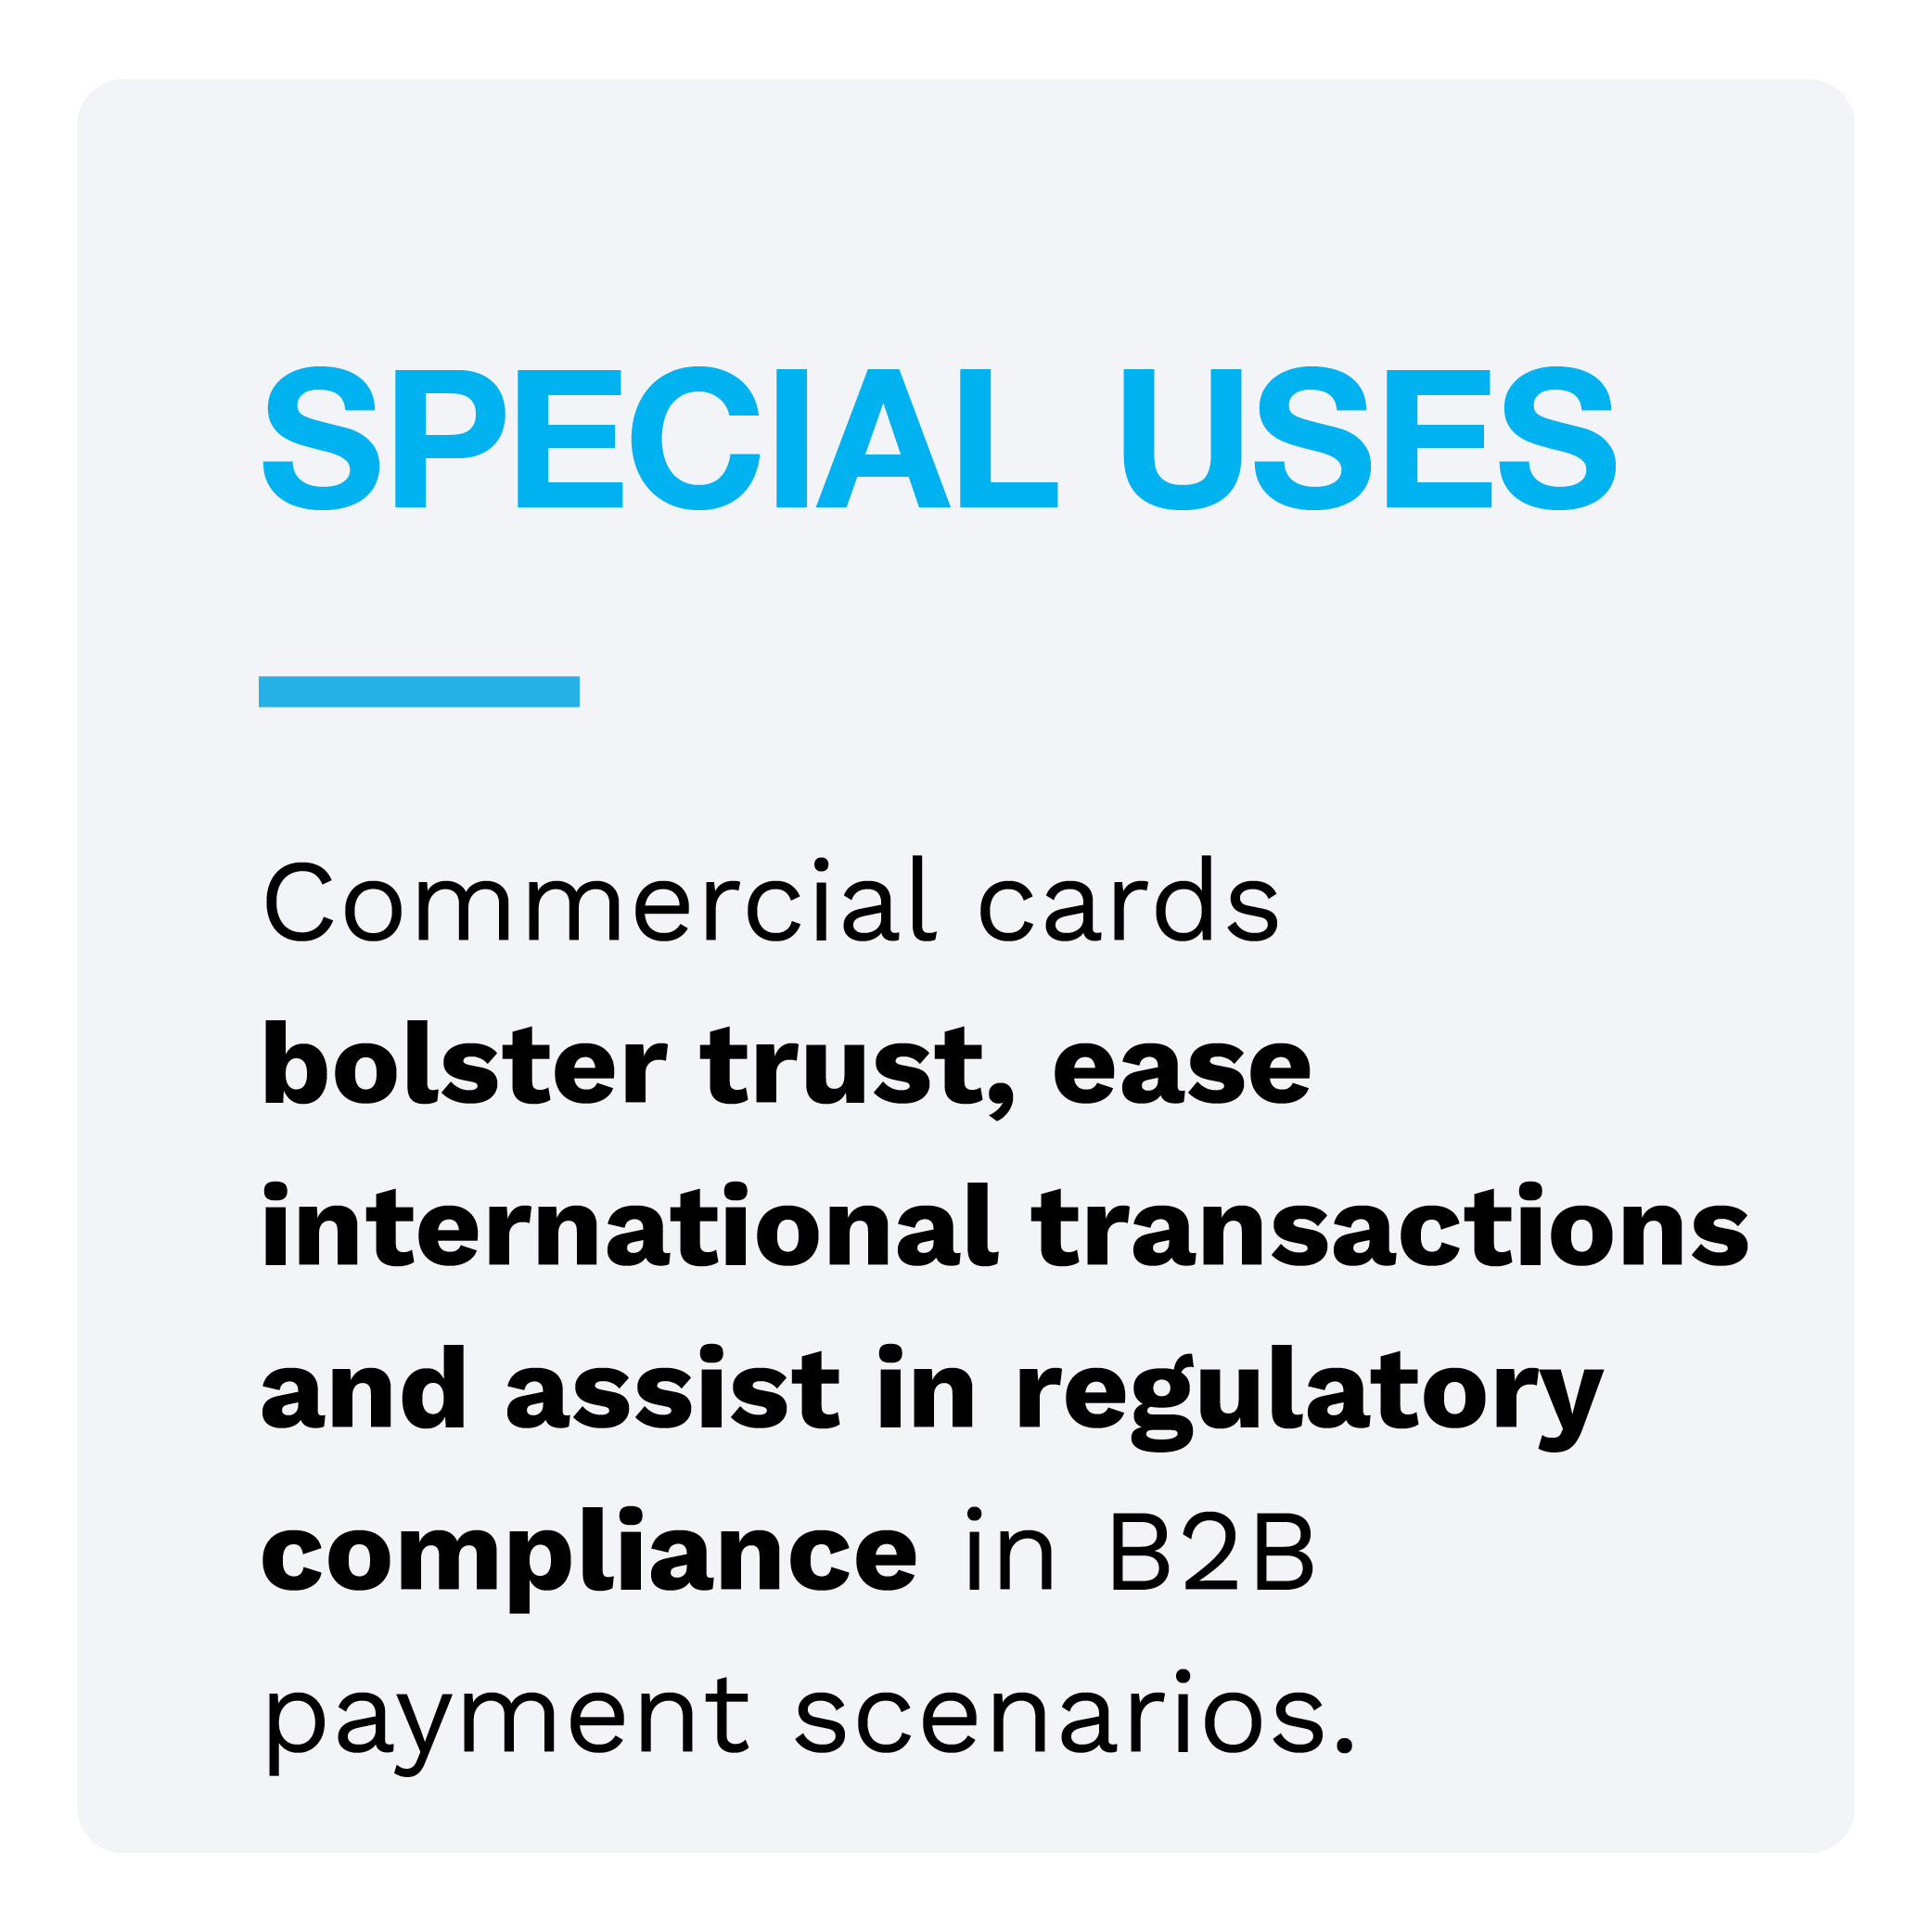 SPECIAL USES: Commercial cards bolster trust, ease international transactions and assist in regulatory compliance in B2B payment scenarios.